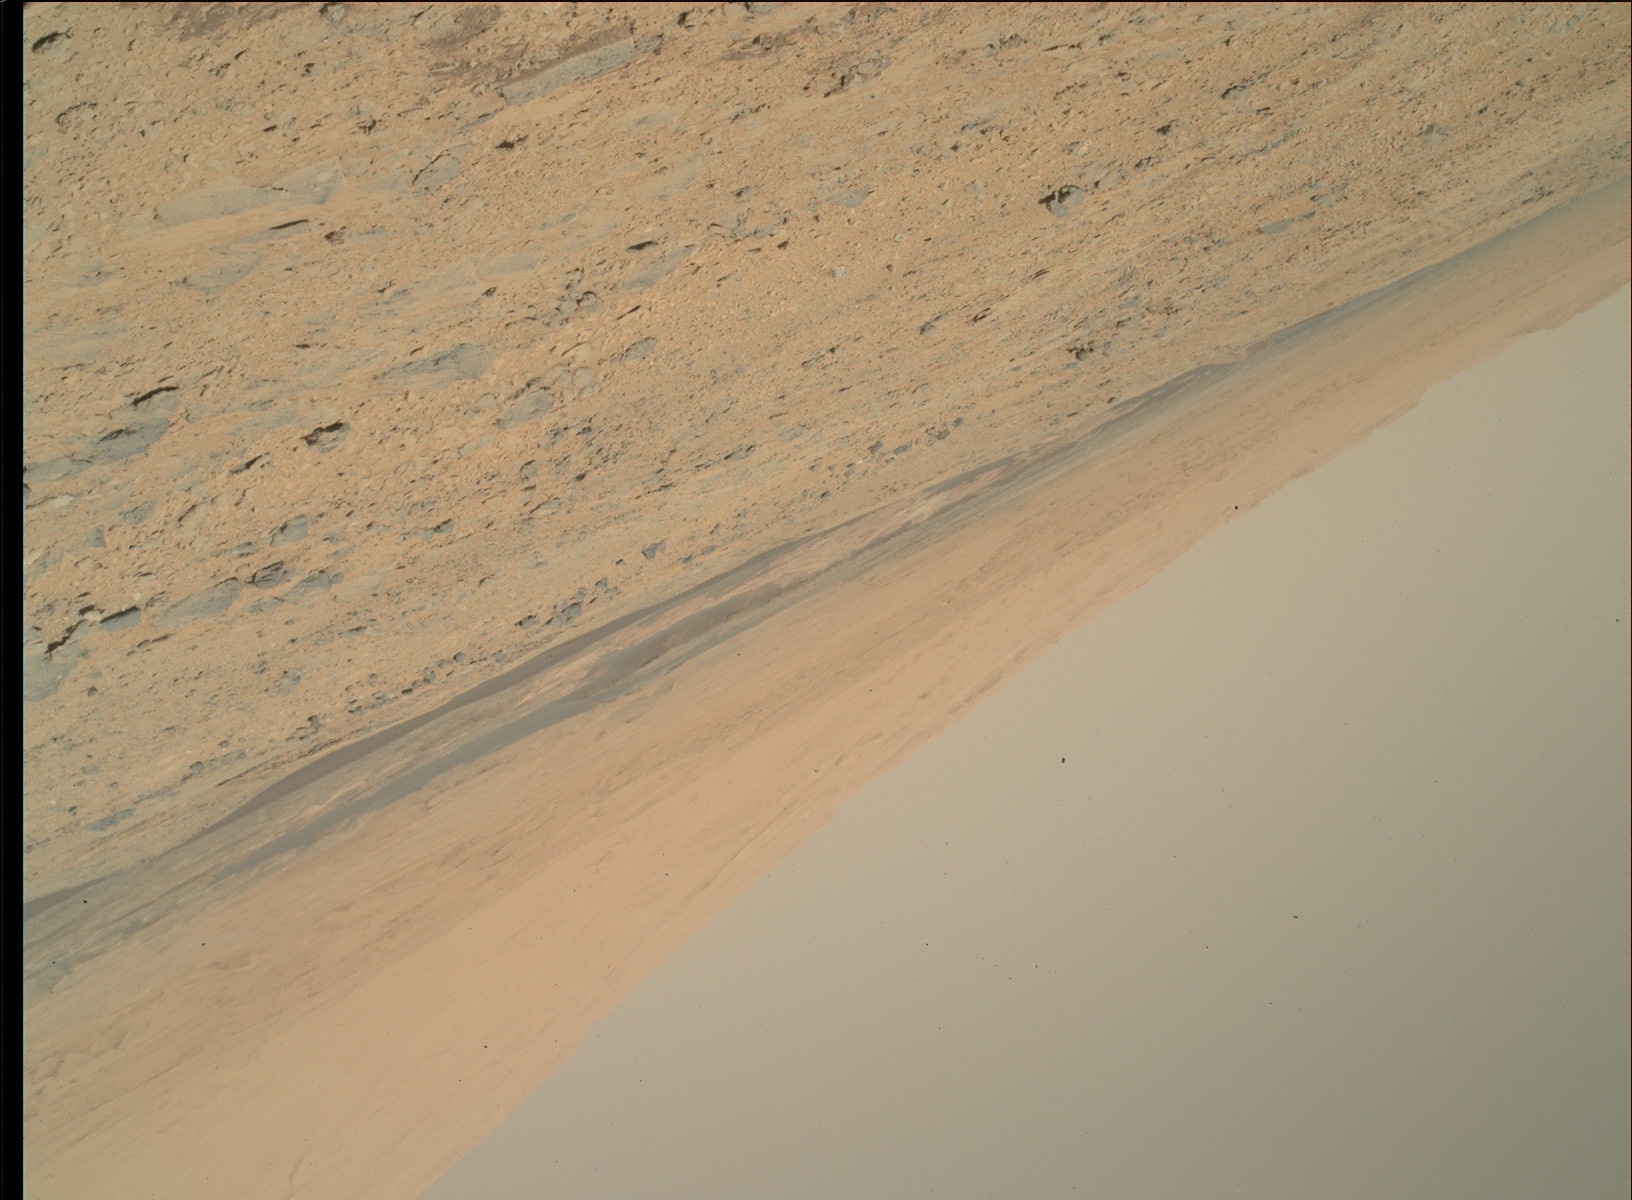 Nasa's Mars rover Curiosity acquired this image using its Mars Hand Lens Imager (MAHLI) on Sol 454